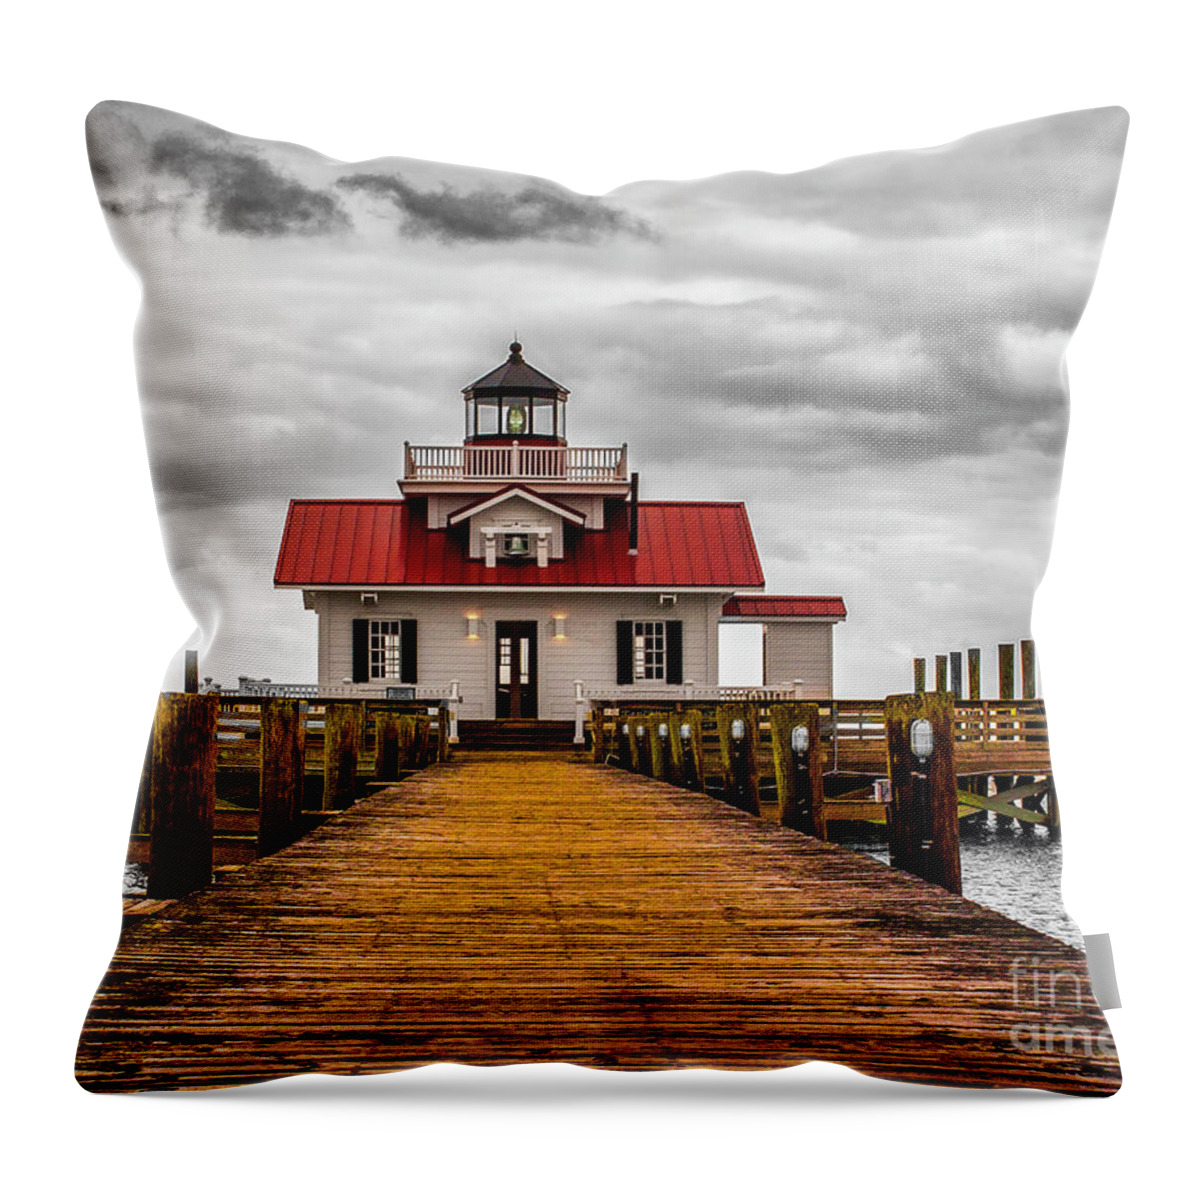 Roanoke Marshes Throw Pillow featuring the photograph Roanoke Marshes Lighthouse by Nick Zelinsky Jr